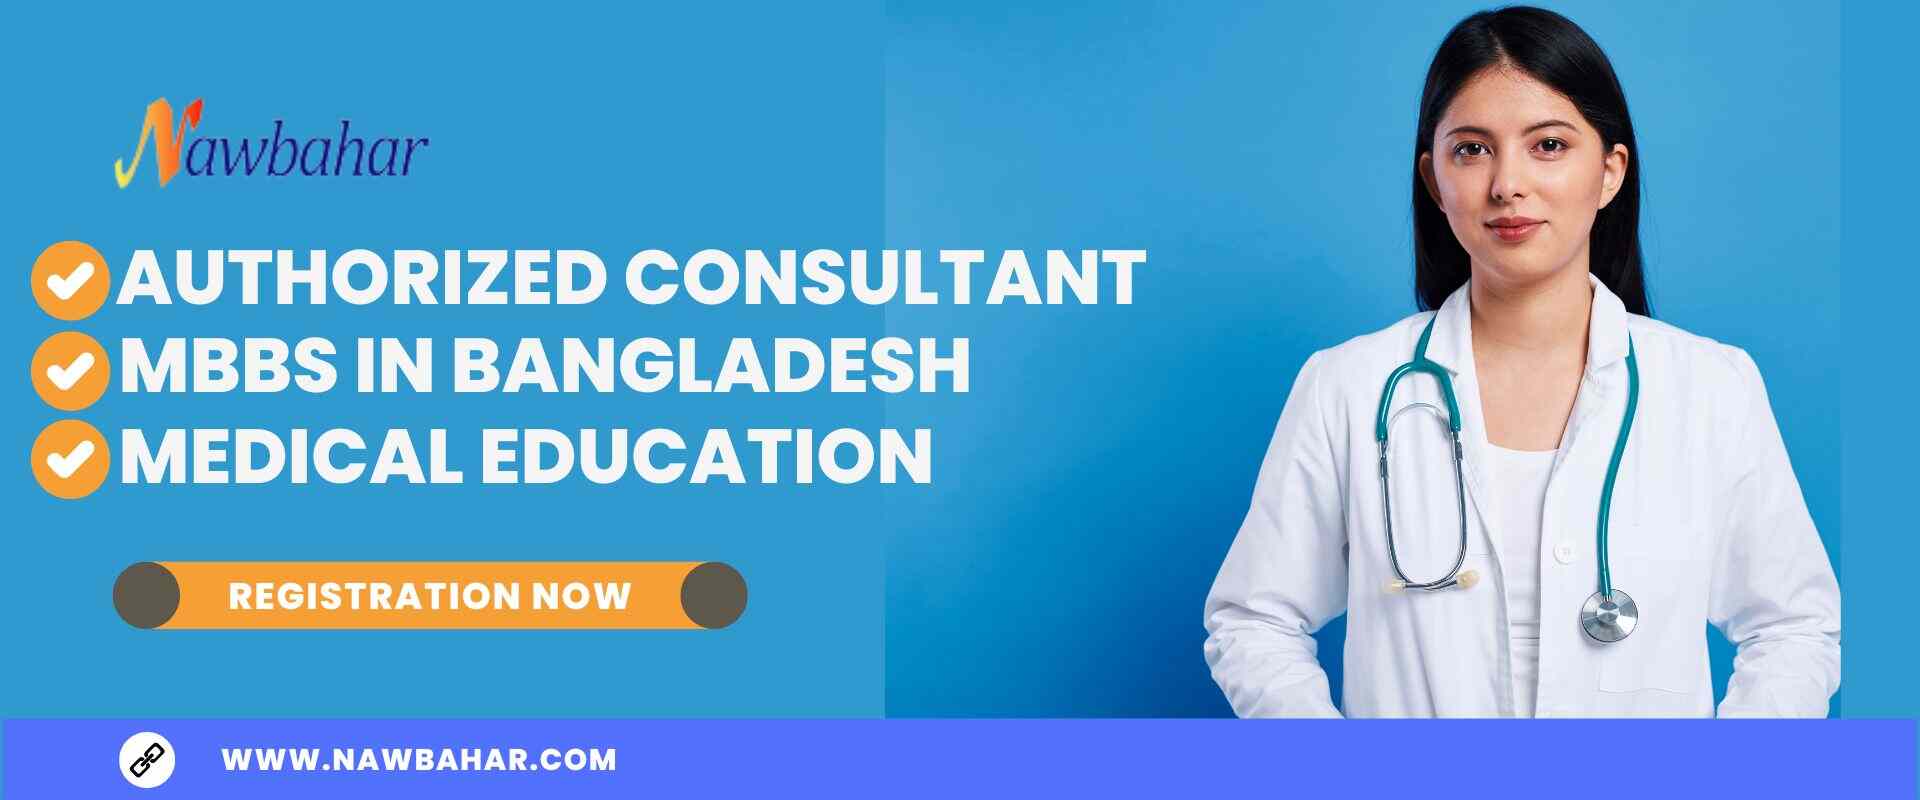 Medical Education I MBBS in Bangladesh I Authorized Consultant